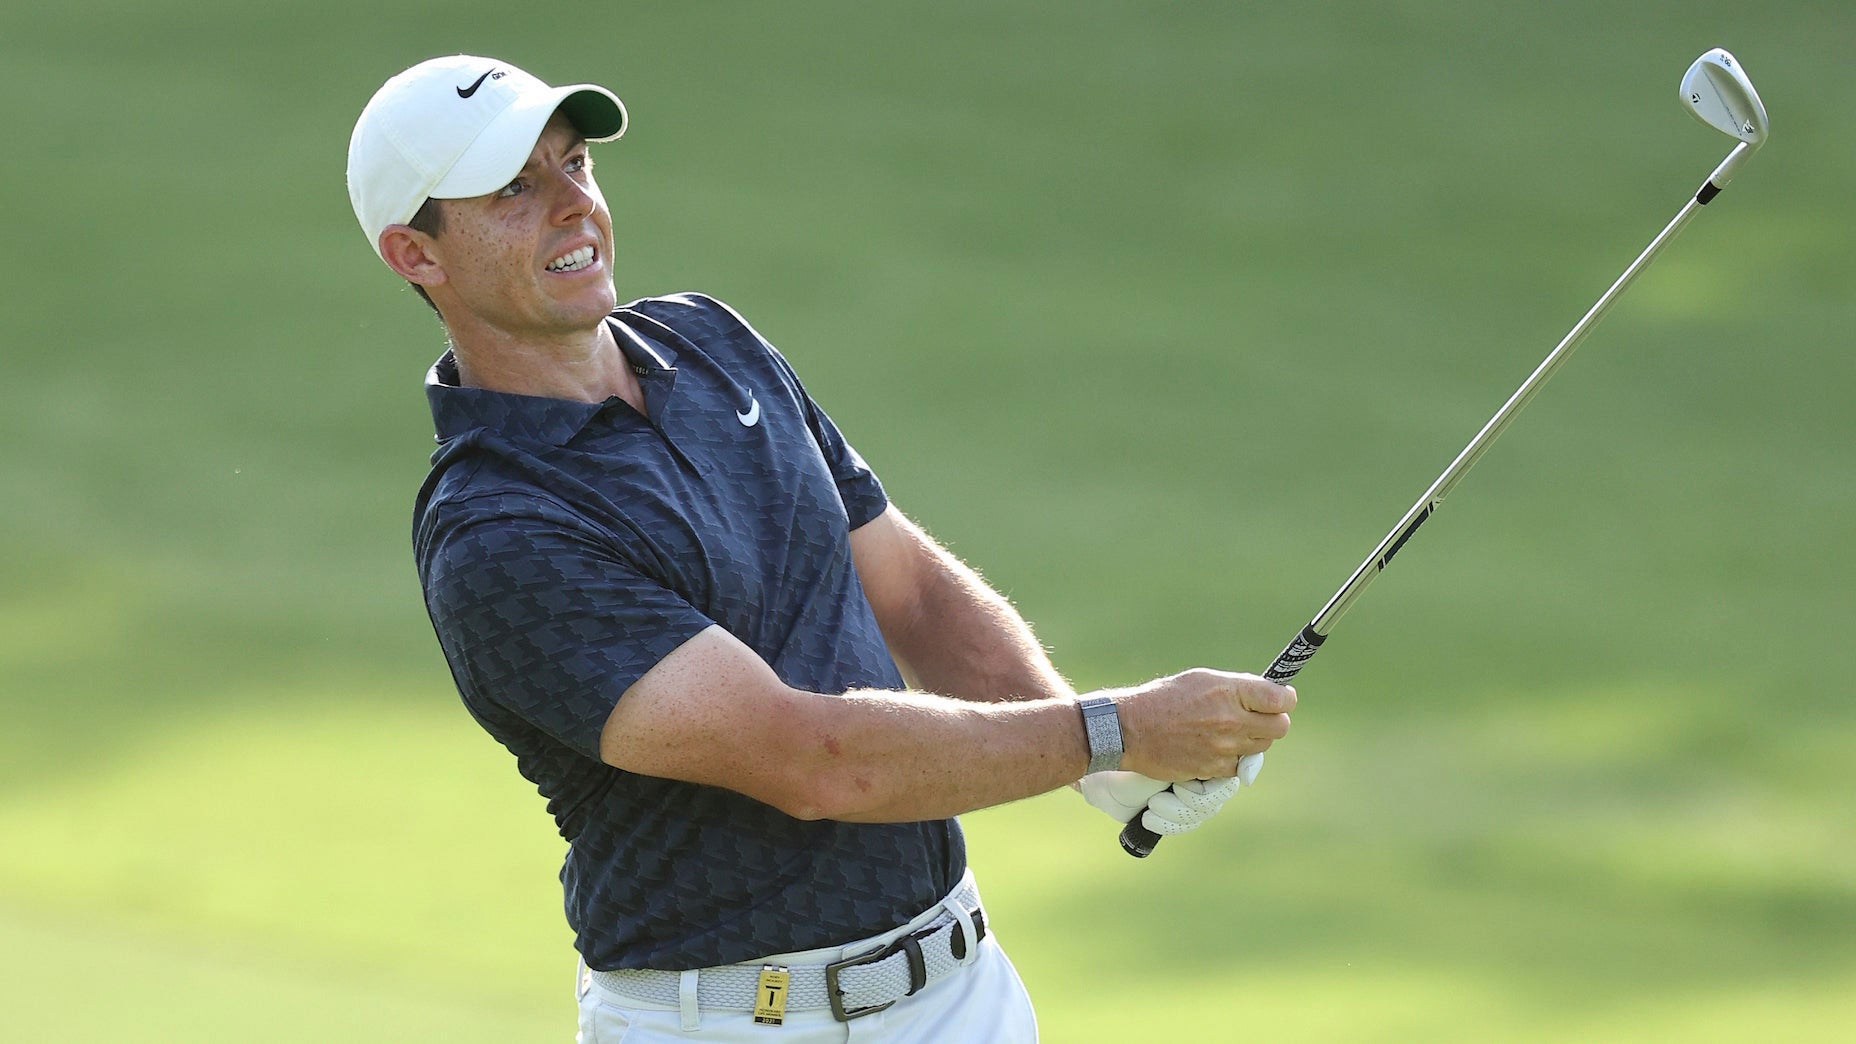 Rory McIlroy Shares Hero Lead Despite Double At Ninth